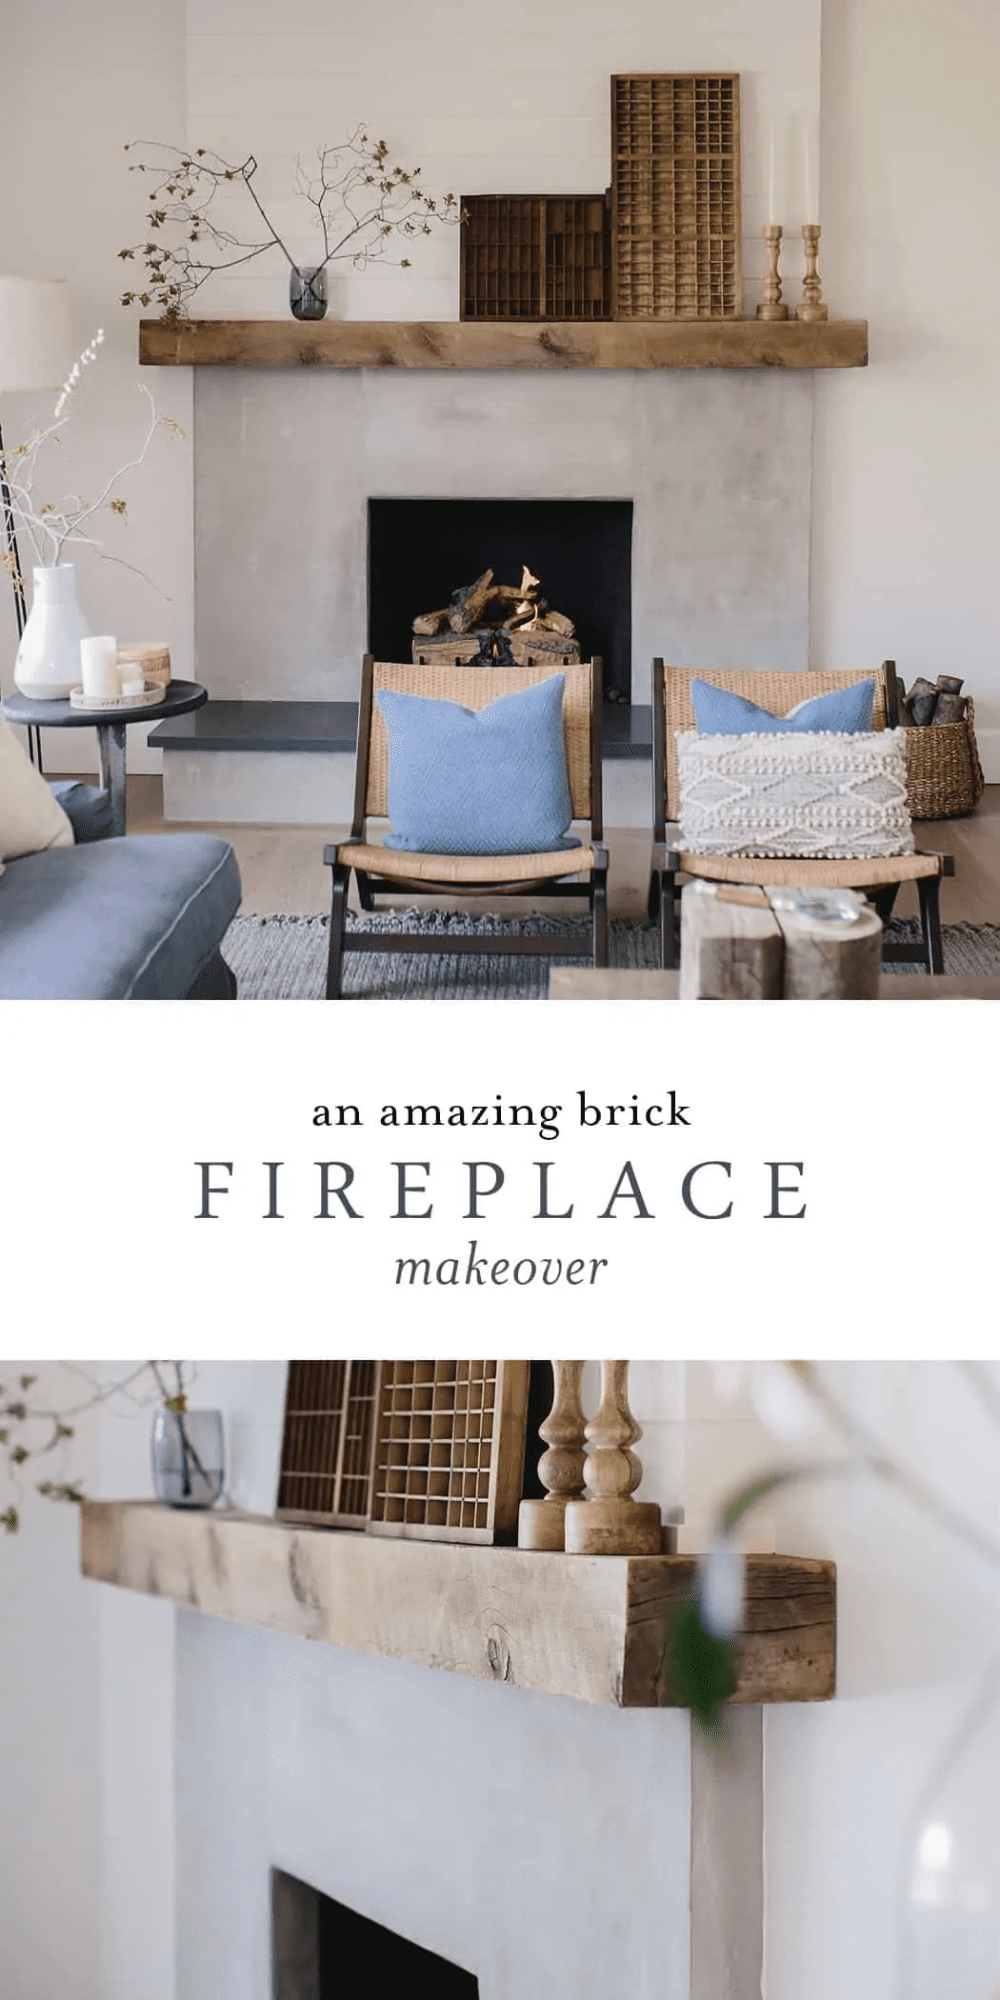 Brick Fireplace Makeover using Cement , Wood Mantel HD Wallpaper